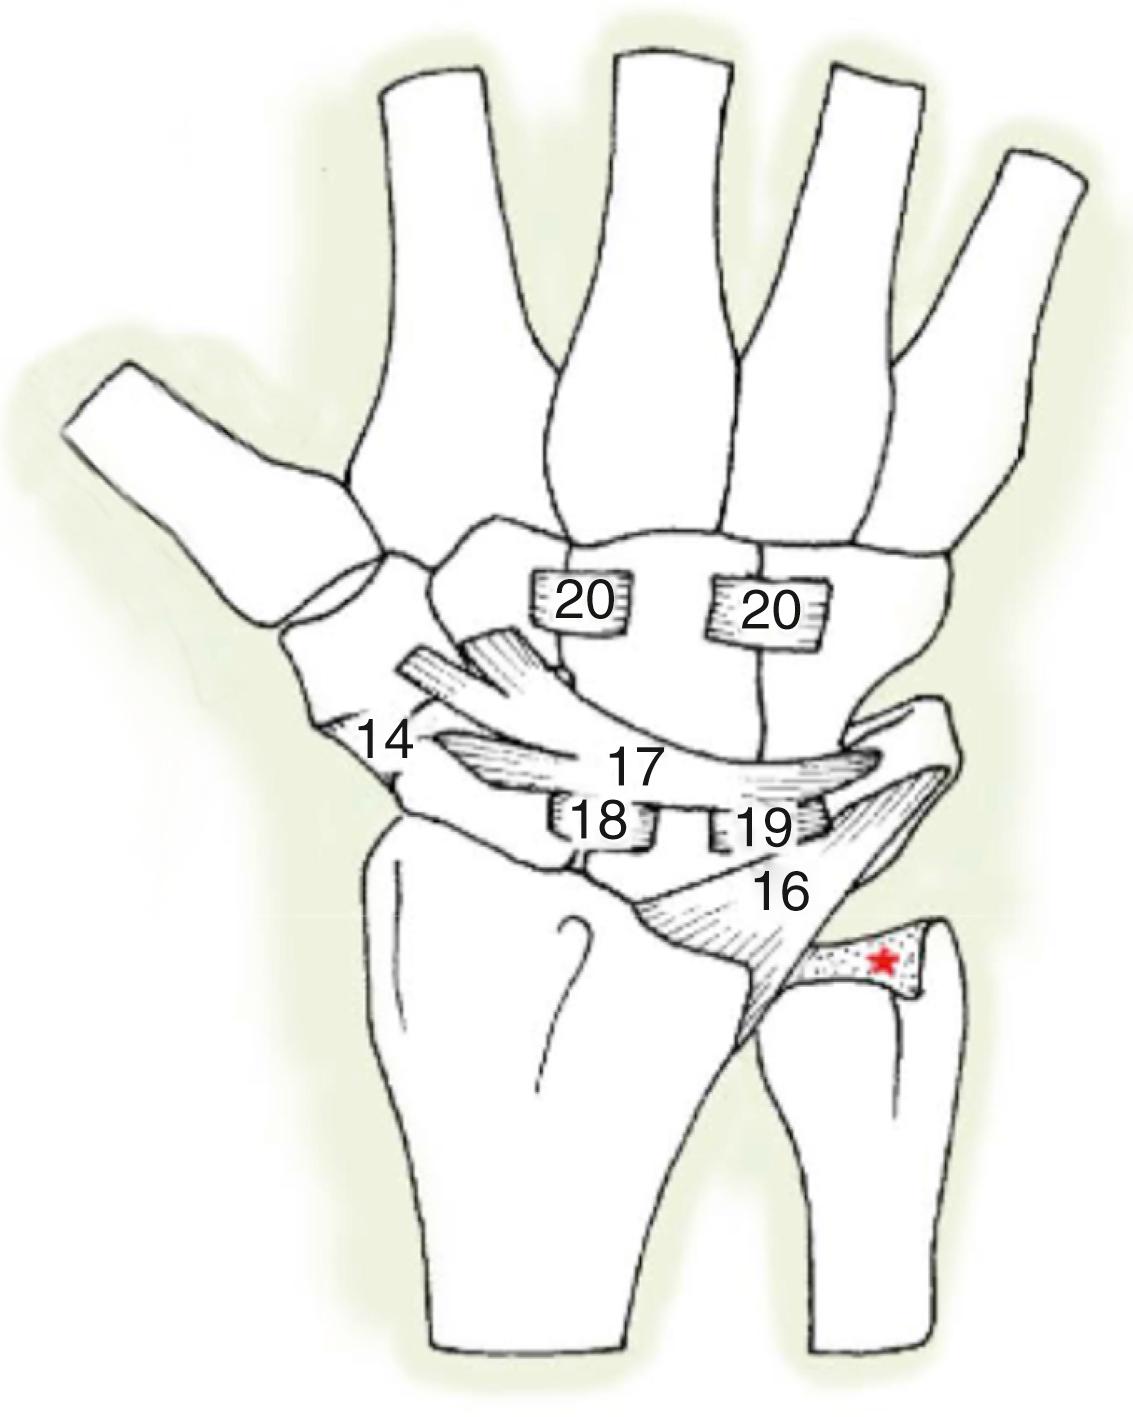 Fig. 72.2, Dorsal ligaments: radial triquetrum, also referred to as dorsal radiocarpal (16) ; triquetrum-scaphoid-trapeziotrapezoid, also known as the dorsal intercarpal ligament (17) ; dorsal scapholunate (18) ; dorsal lunate triquetrum (19) ; and dorsal transverse interosseous ligaments of the distal row (20) . (Asterisk) Triangular fibrocartilage.